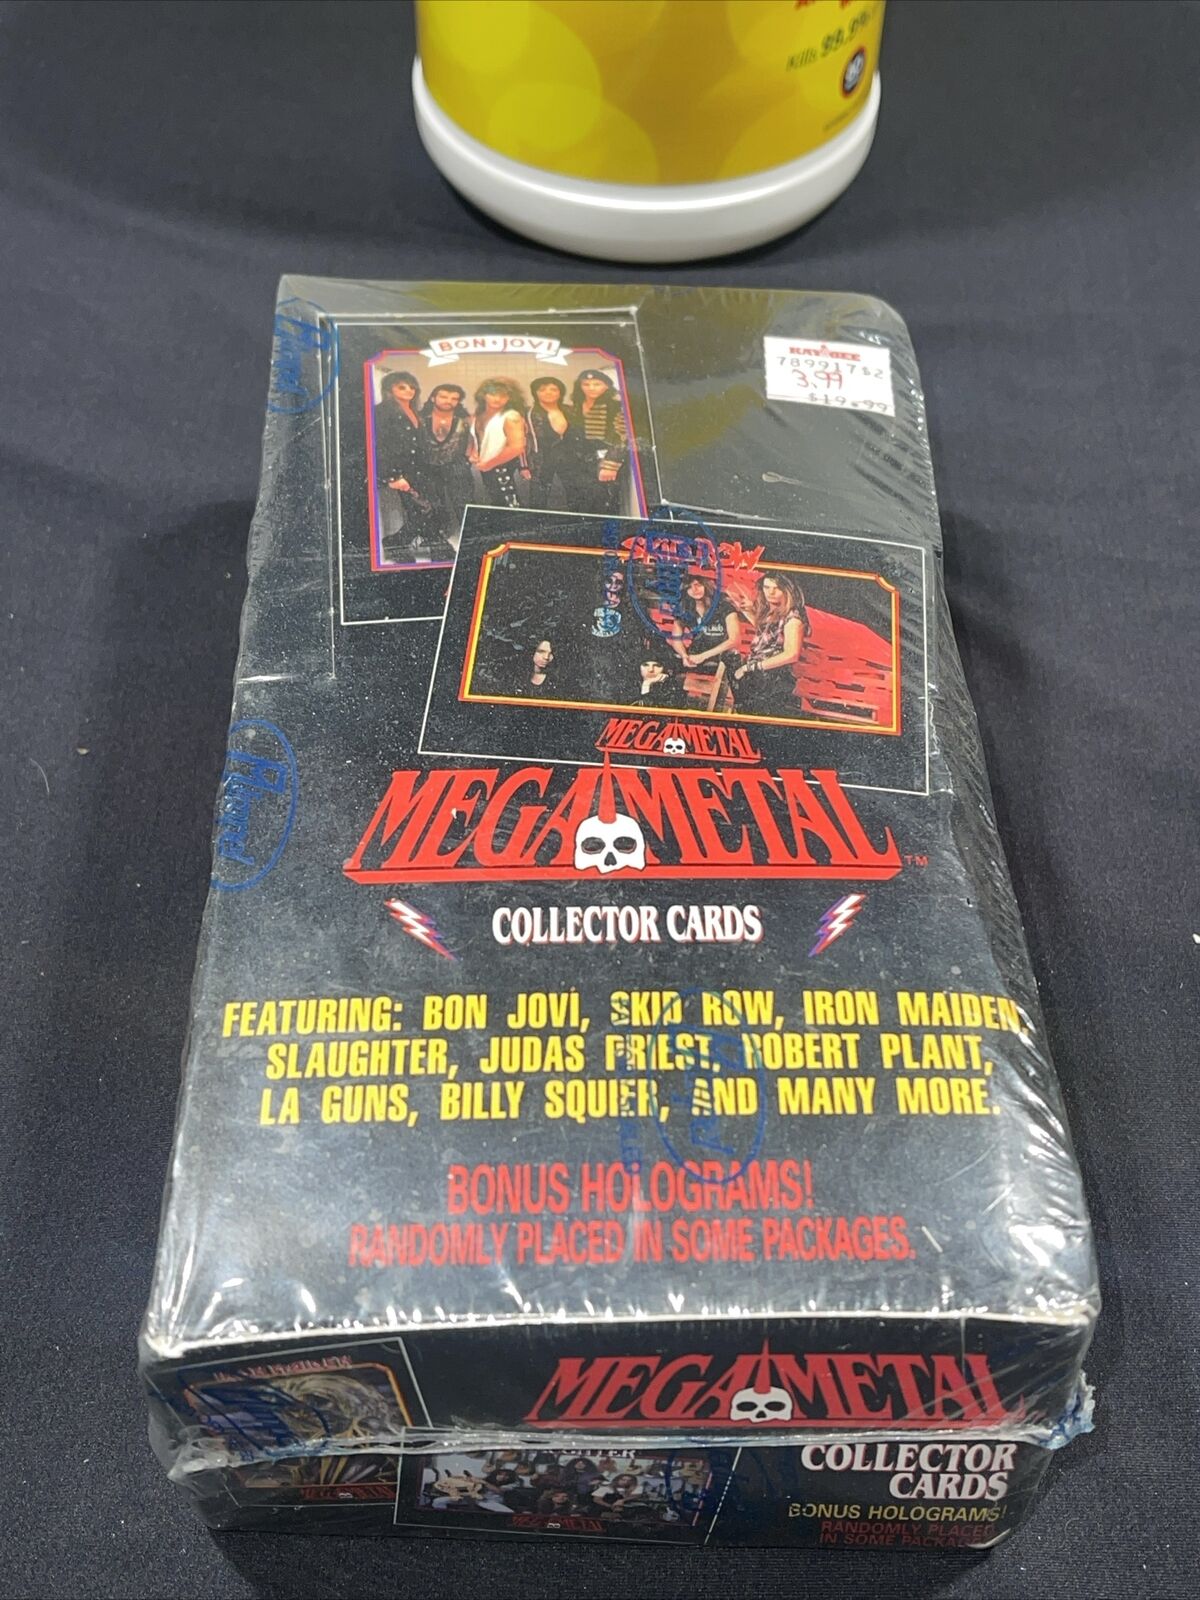 Mega Metal Collector Cards, Year 1991, Heavy Metal, Impel, New, Factory Sealed